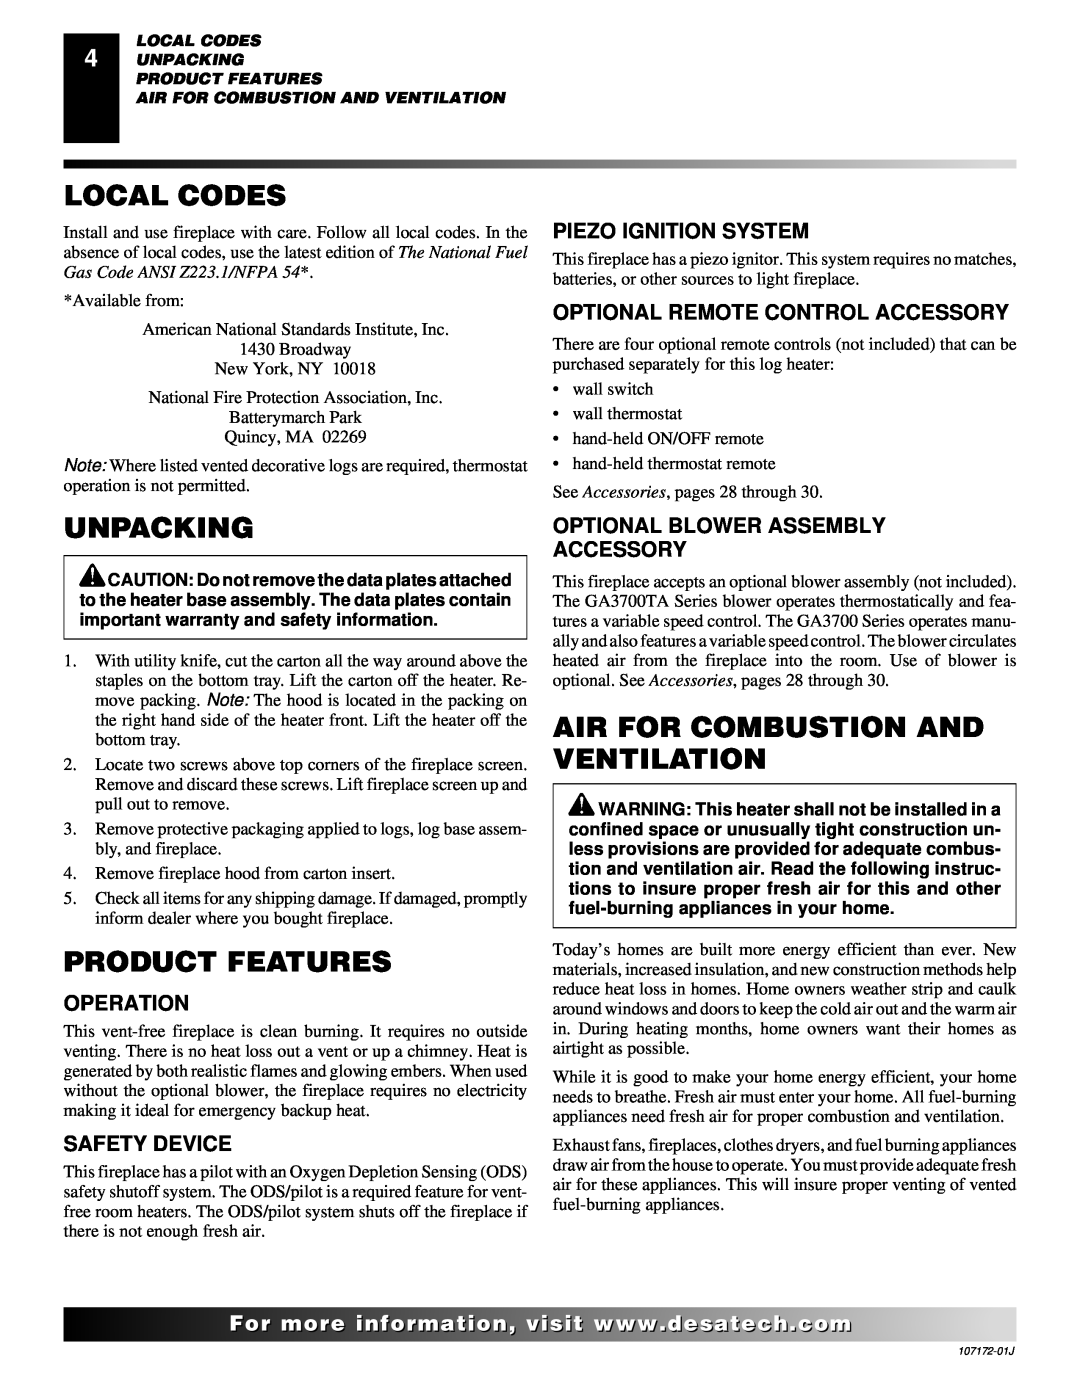 Desa EFS33PRA Local Codes, Unpacking, Product Features, Air For Combustion And Ventilation, Piezo Ignition System 